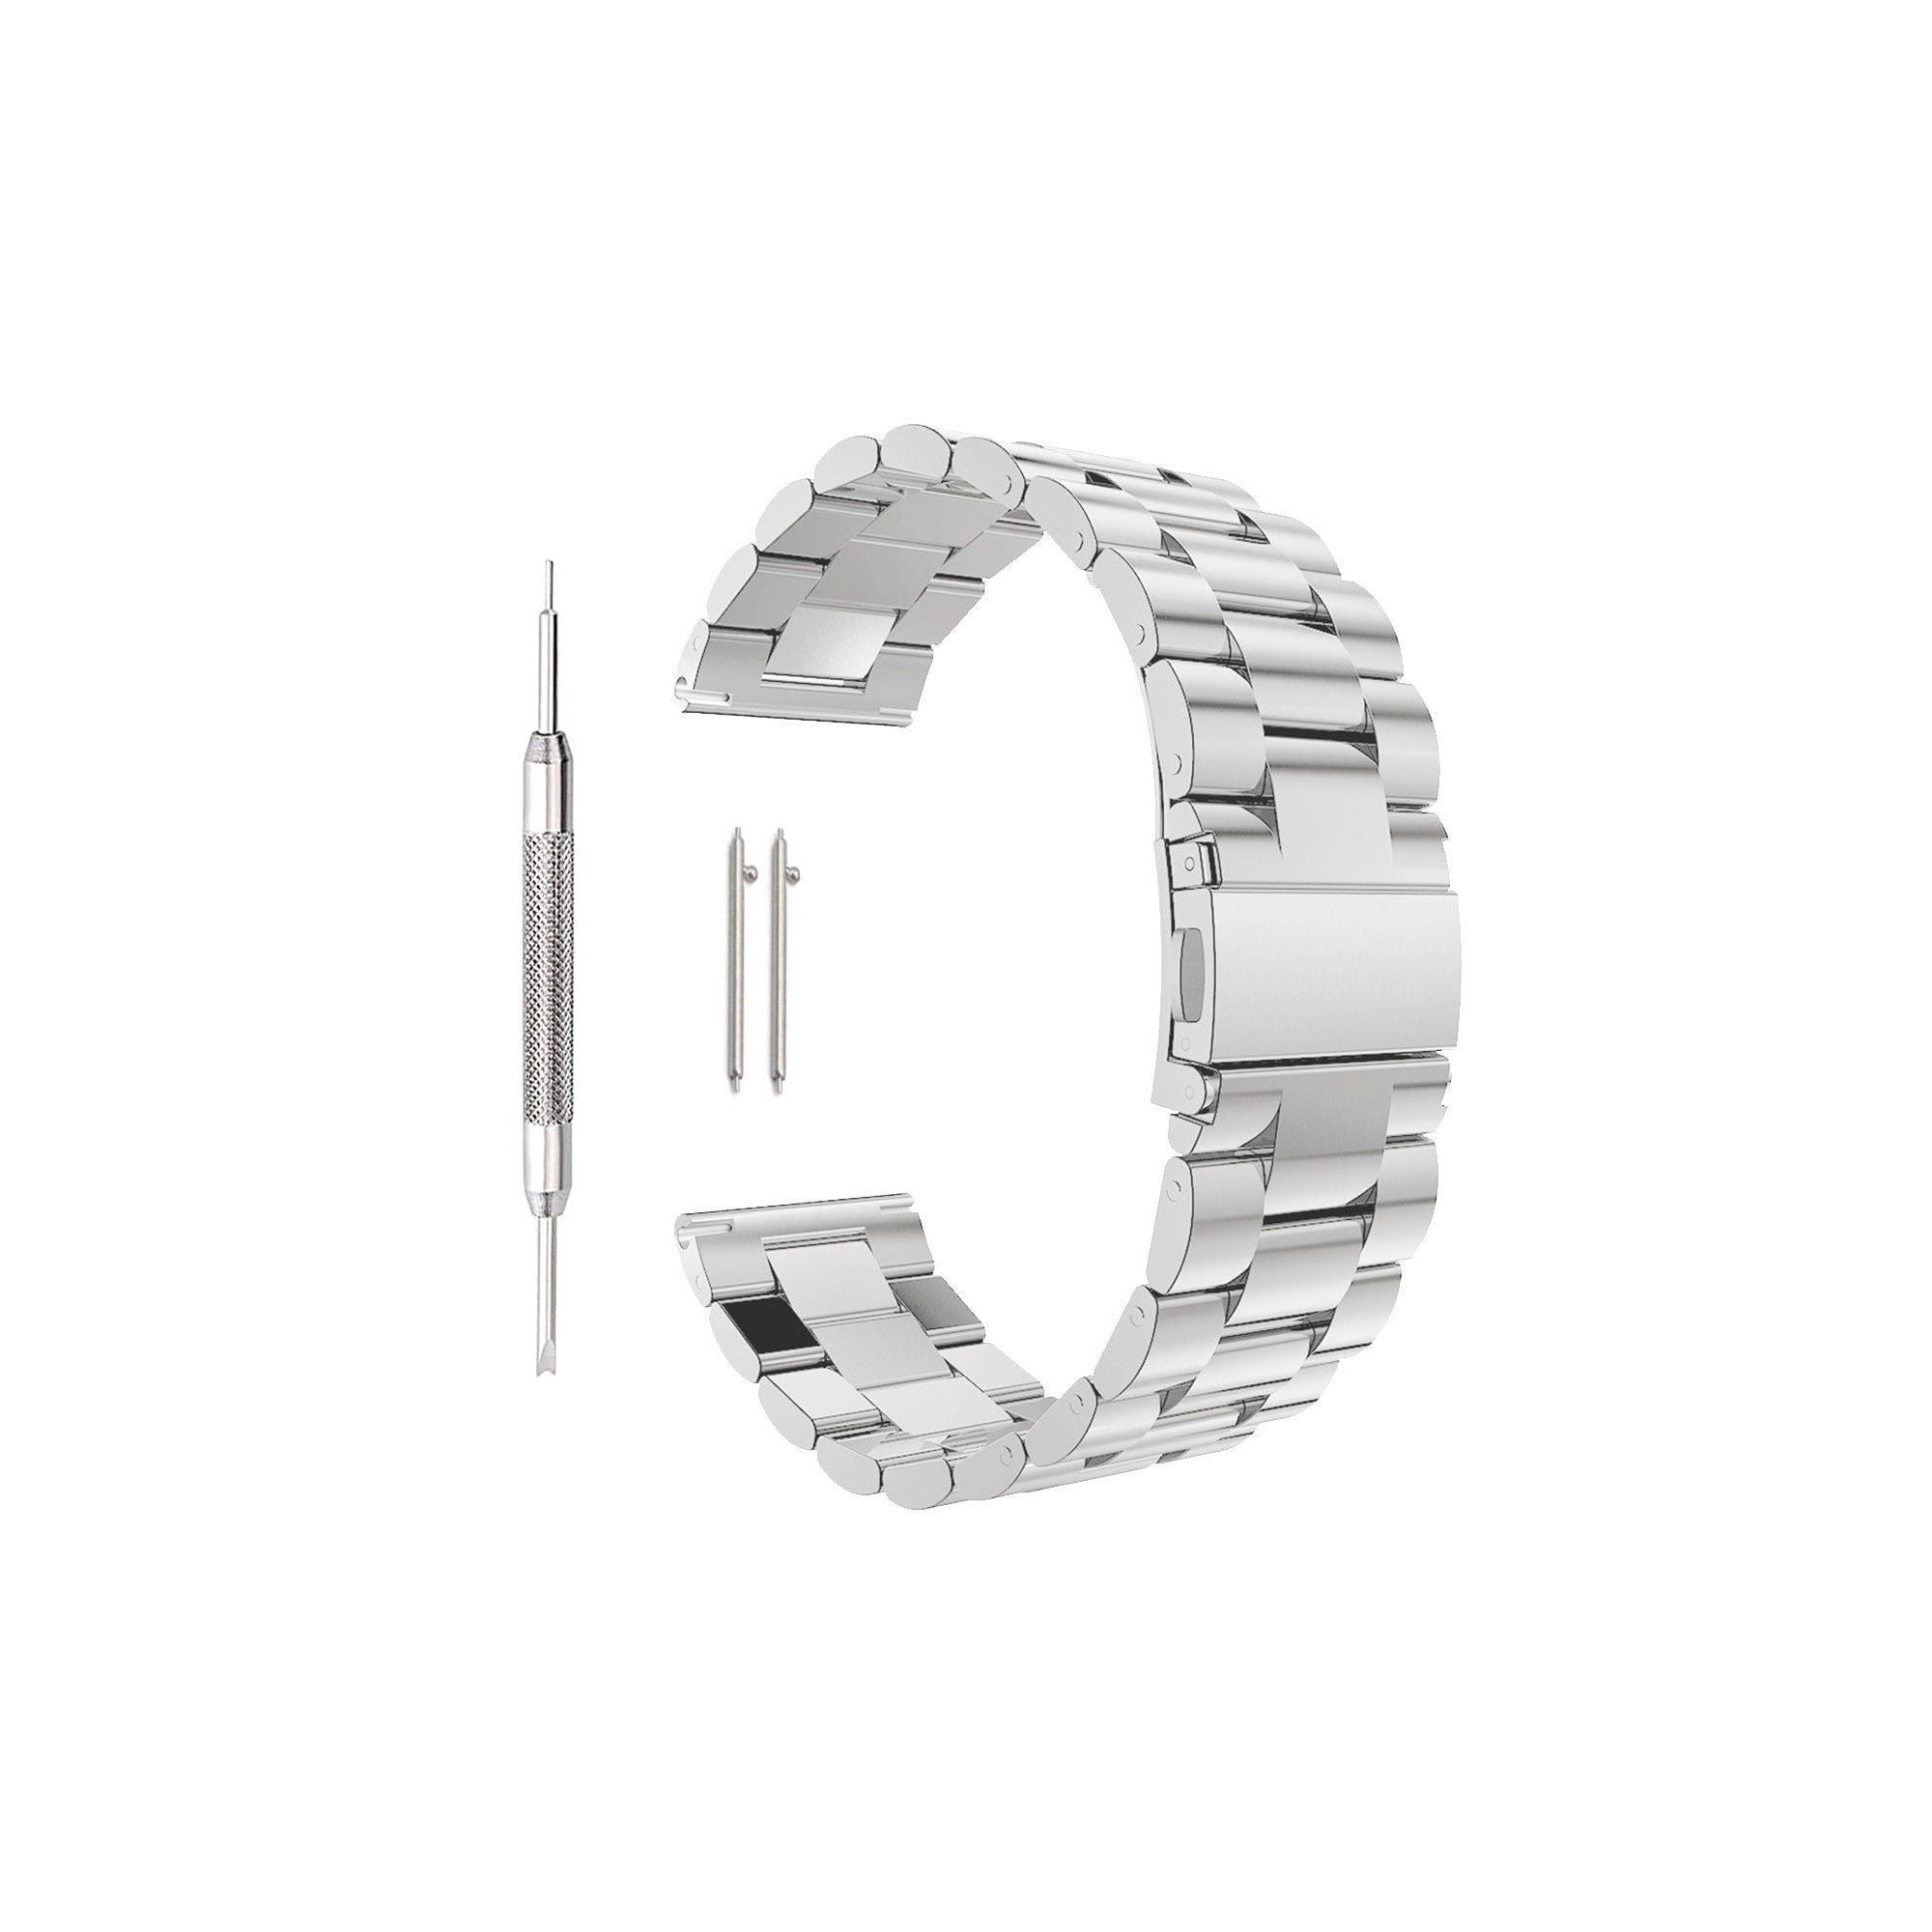 Stainless Steel Metal Band Replacement, SOATUTO Quick Release Folding Clasp Solid Stainless Steel Watch band Strap For Men's Women's Watch (20mm-Silver) - Walmart.com